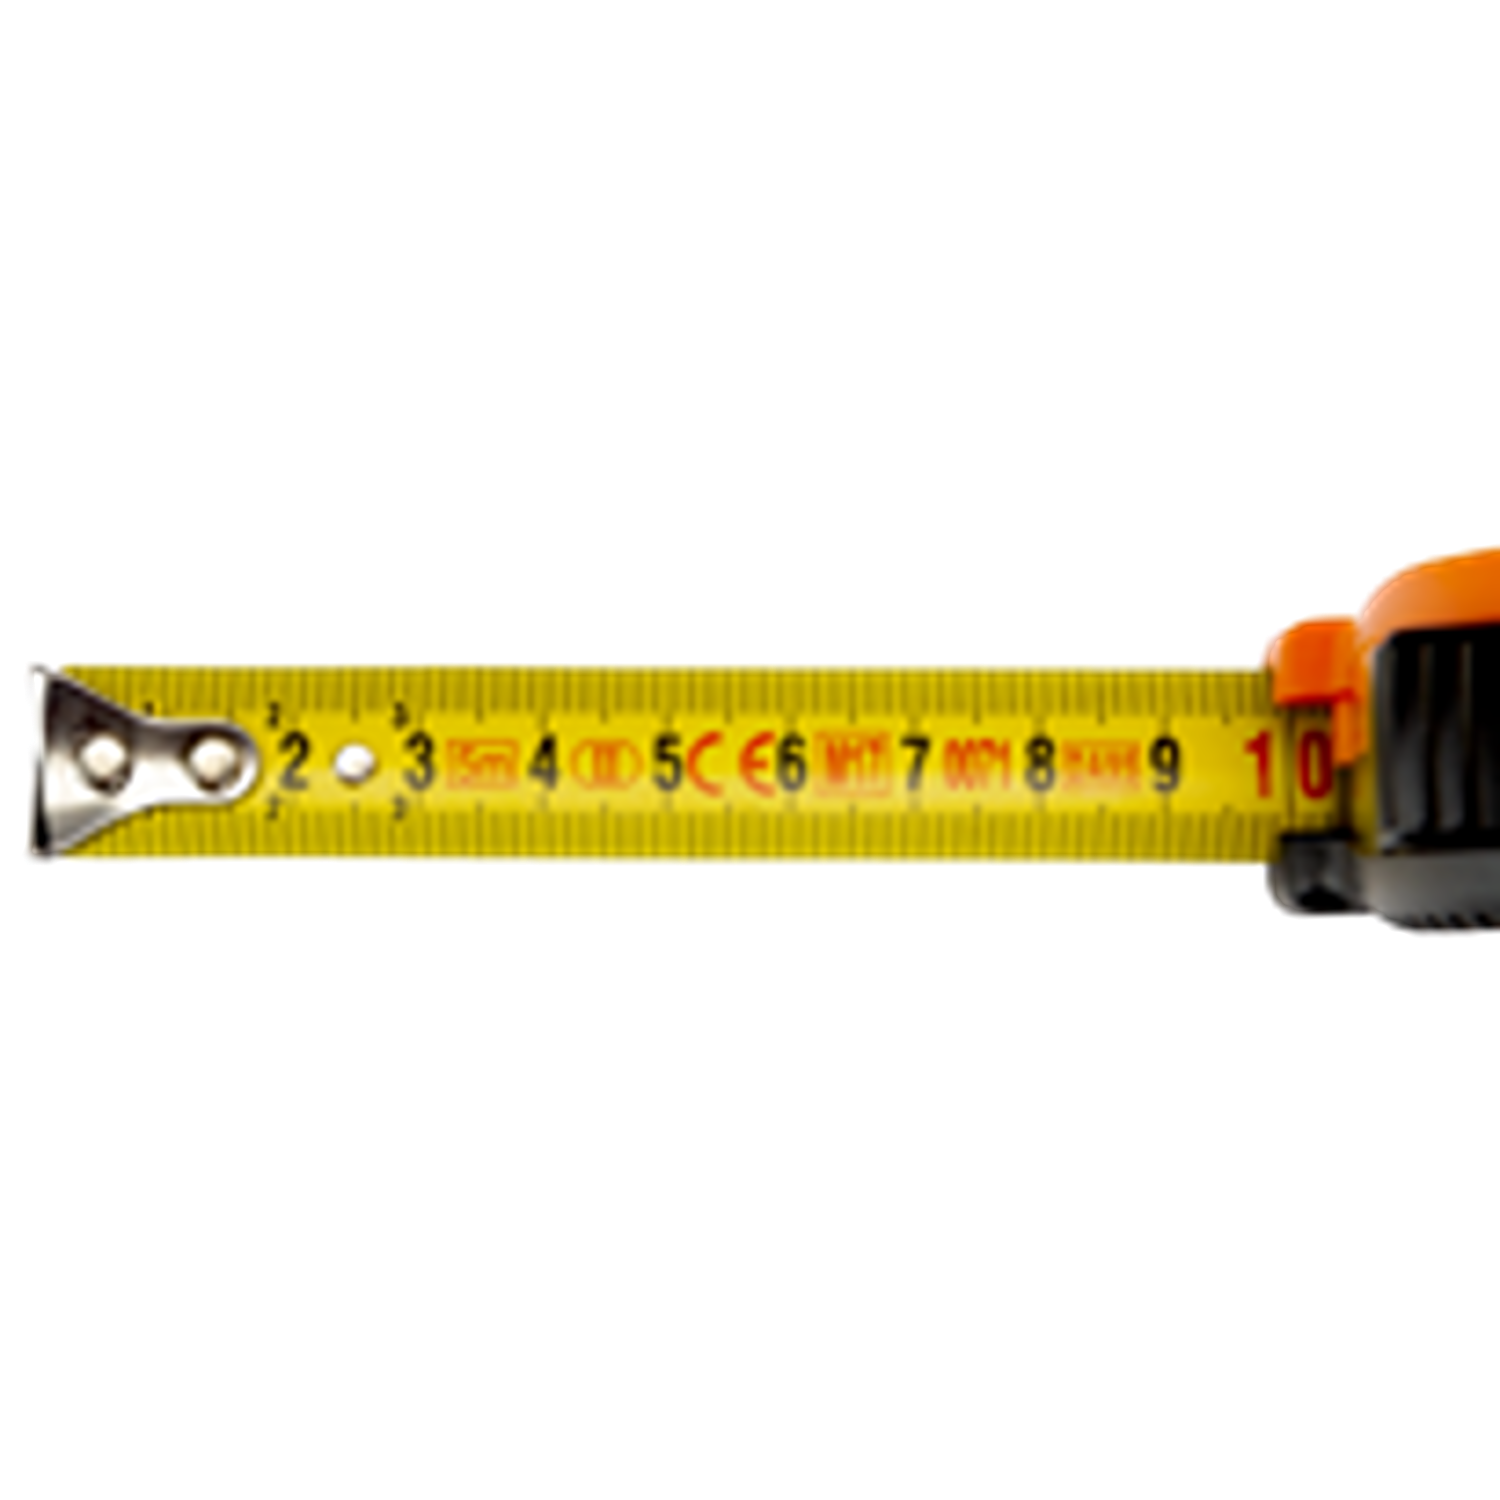 BAHCO MTC_C2 Short Measuring Tape with ABS Grip Compact Class-II - Premium Measuring Tape from BAHCO - Shop now at Yew Aik.